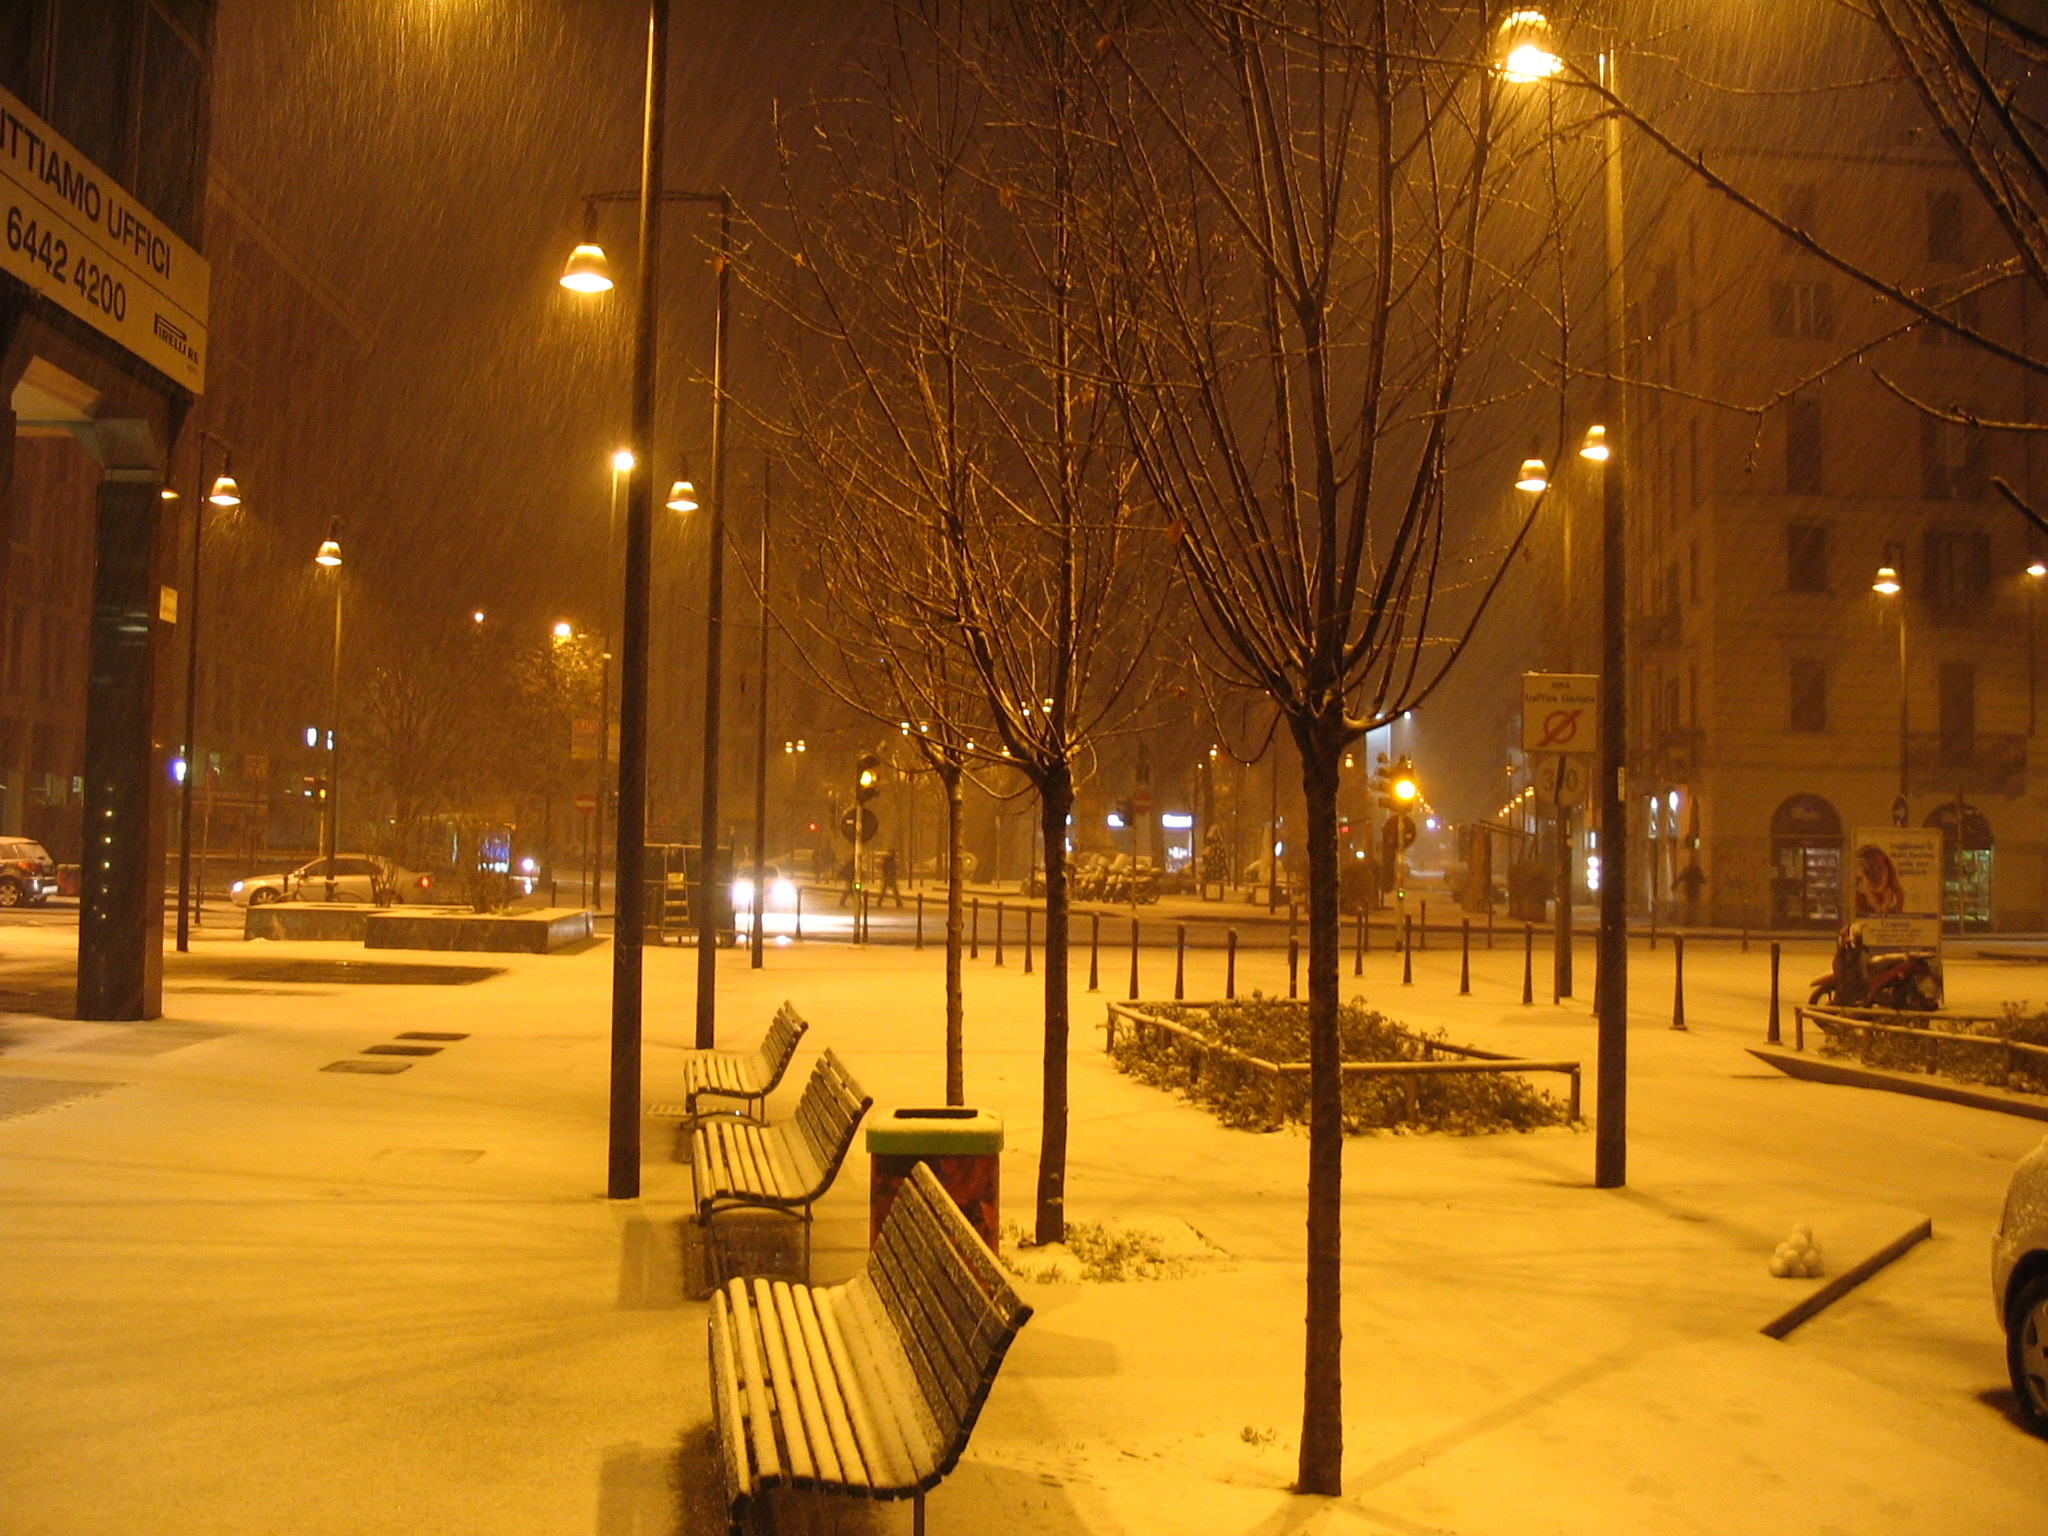 italy, World, Place, Architecture, Downtown, Lights, Night, Buildings, Winter, Snow, Storm, Blizzard, Snowing, Drops, Flakes, Bench, Park, Sidewalk, Urban, Seasons Wallpaper